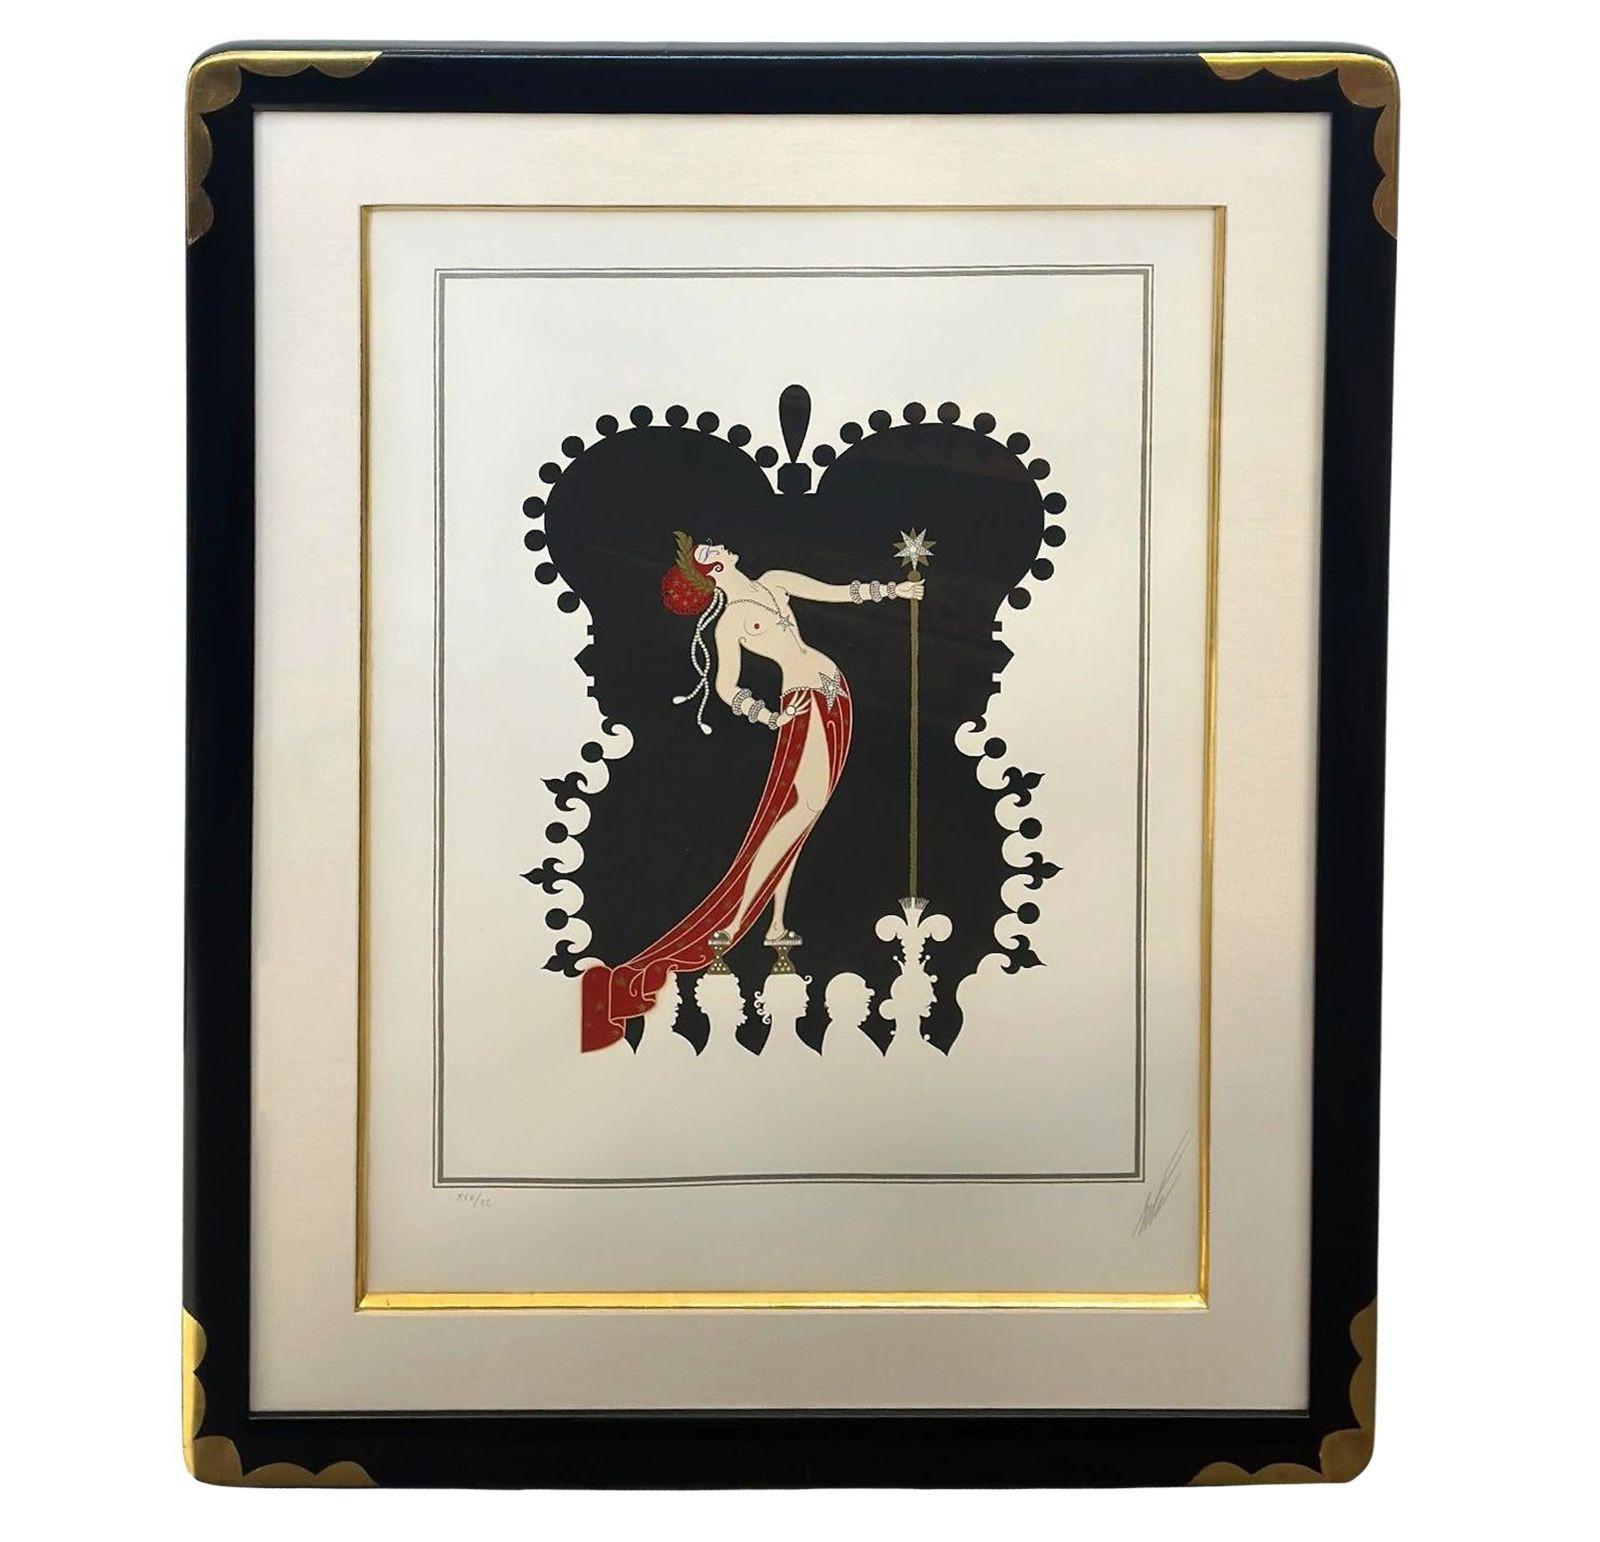 Set of 7 Erté Lithographs of the Seven Deadly Sins, 1982 For Sale 1